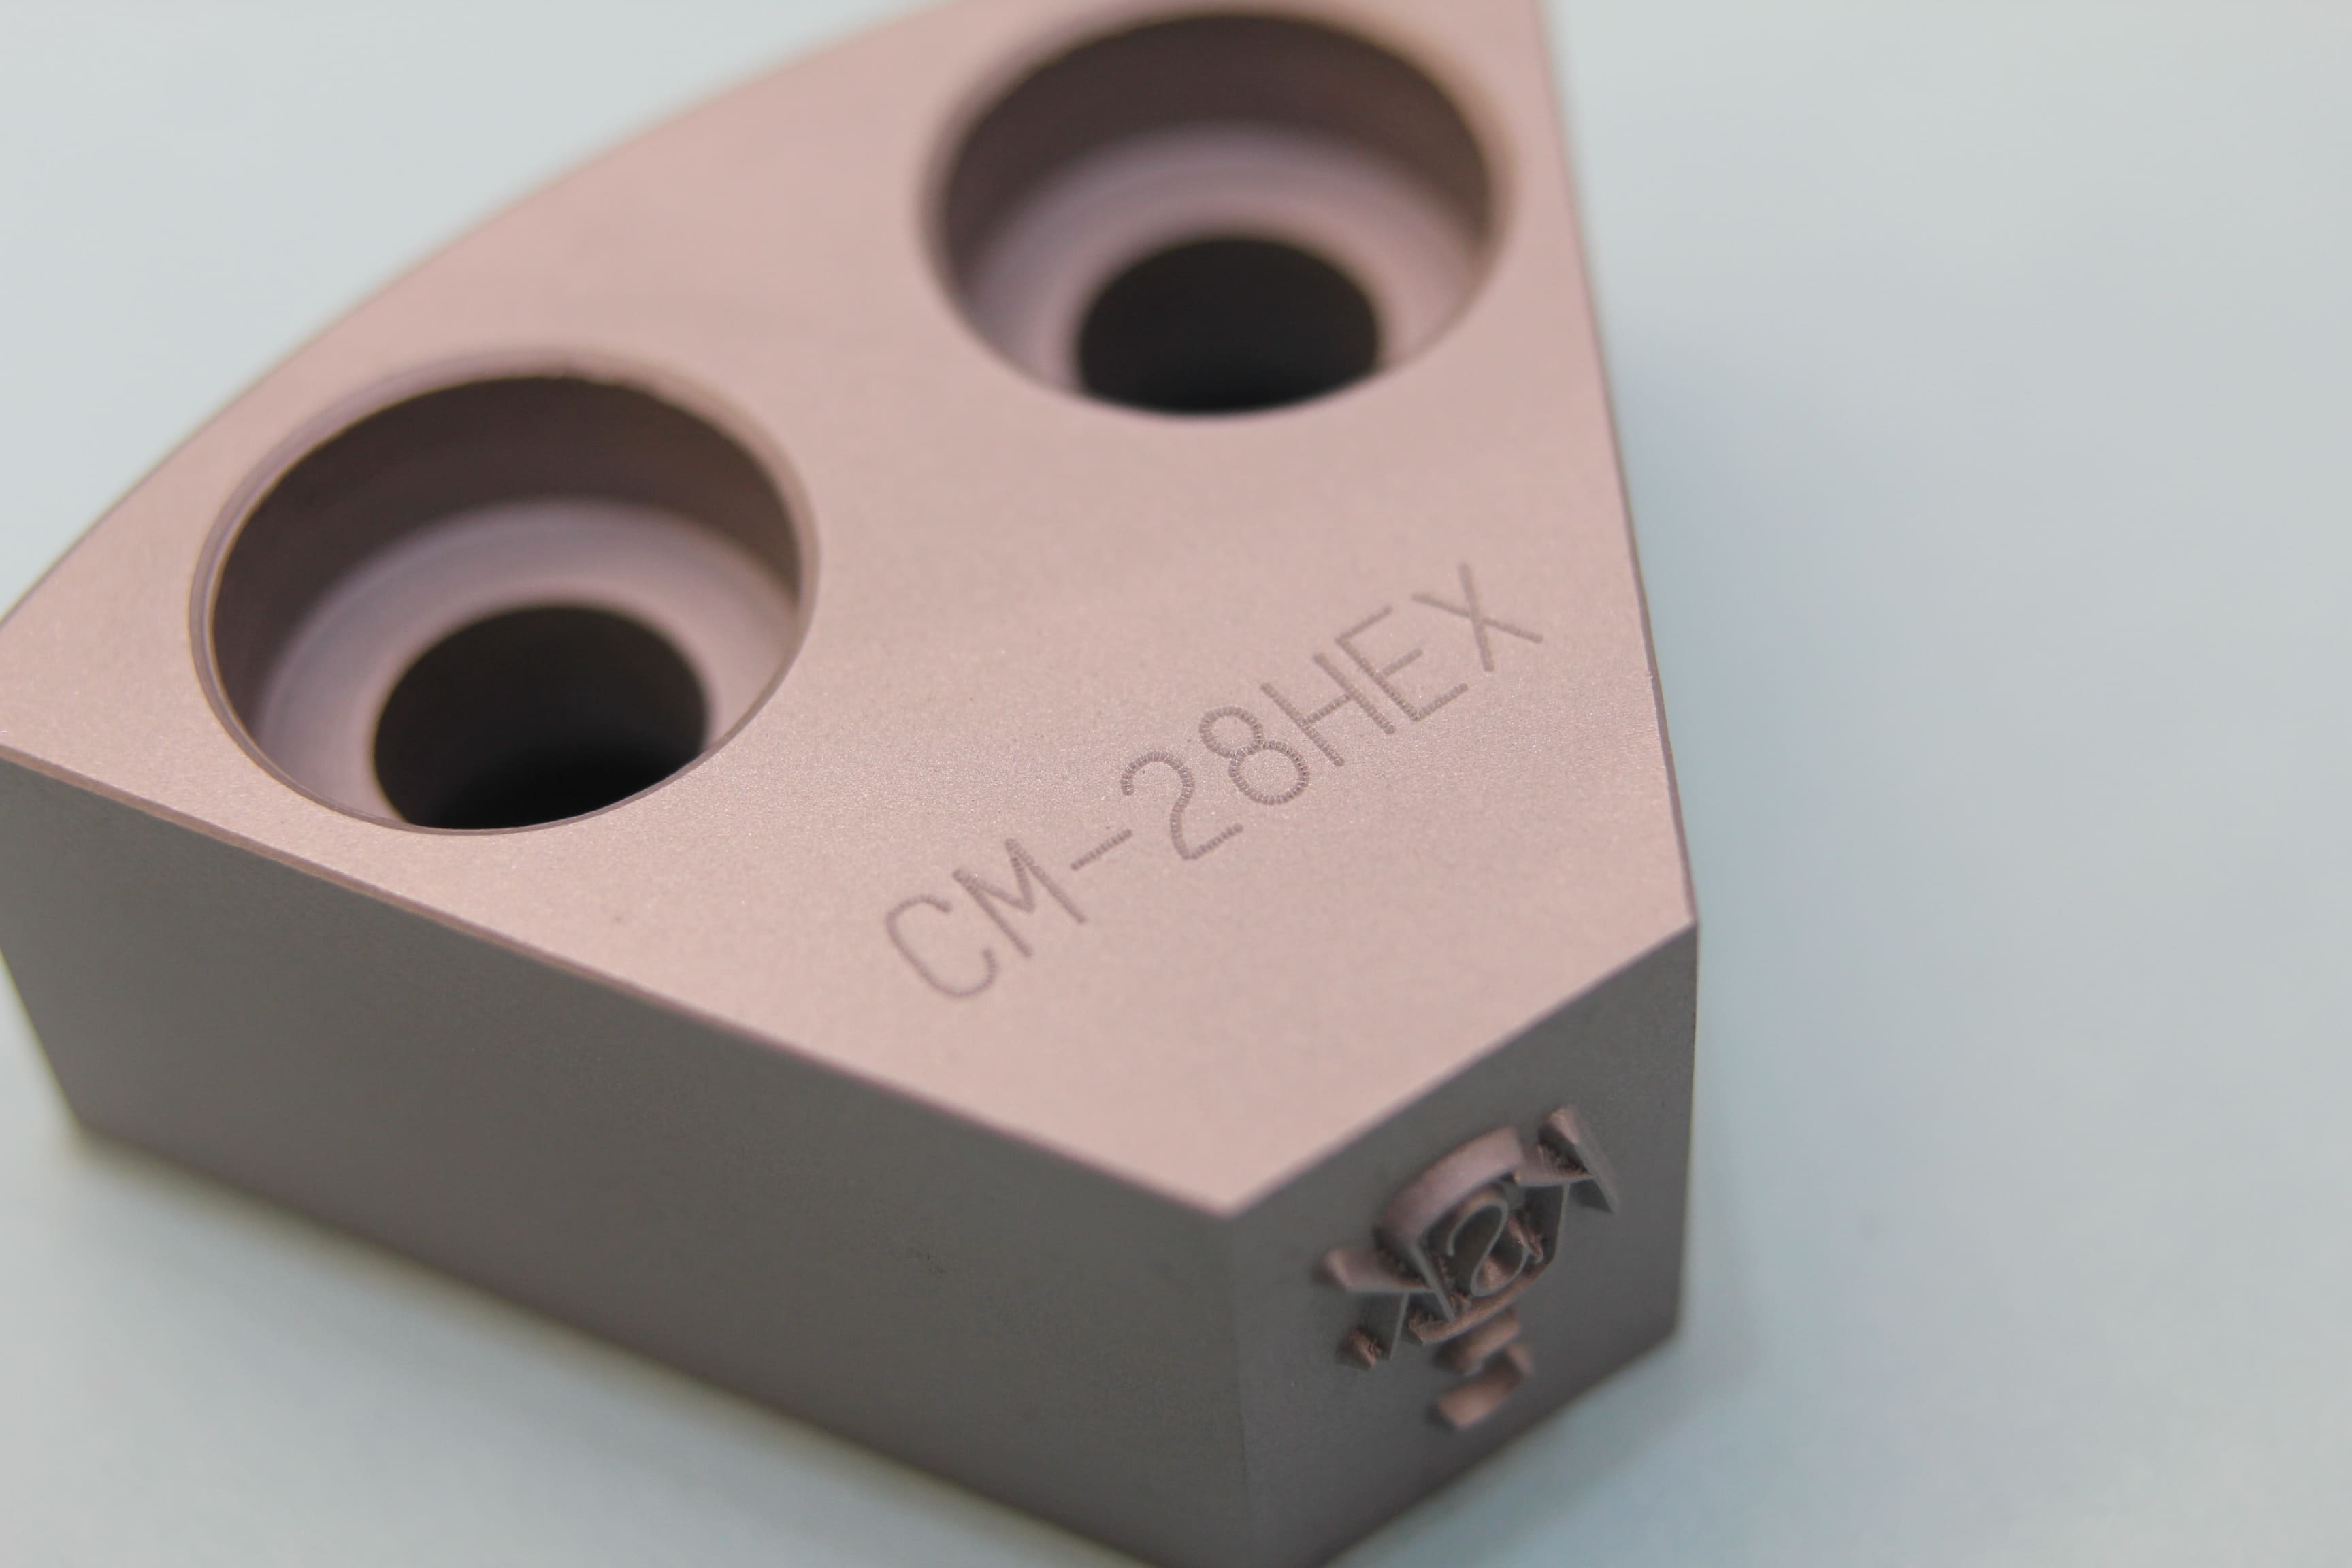 Image of hardened steel engraved with text and numbers 'CM-28HEX'.